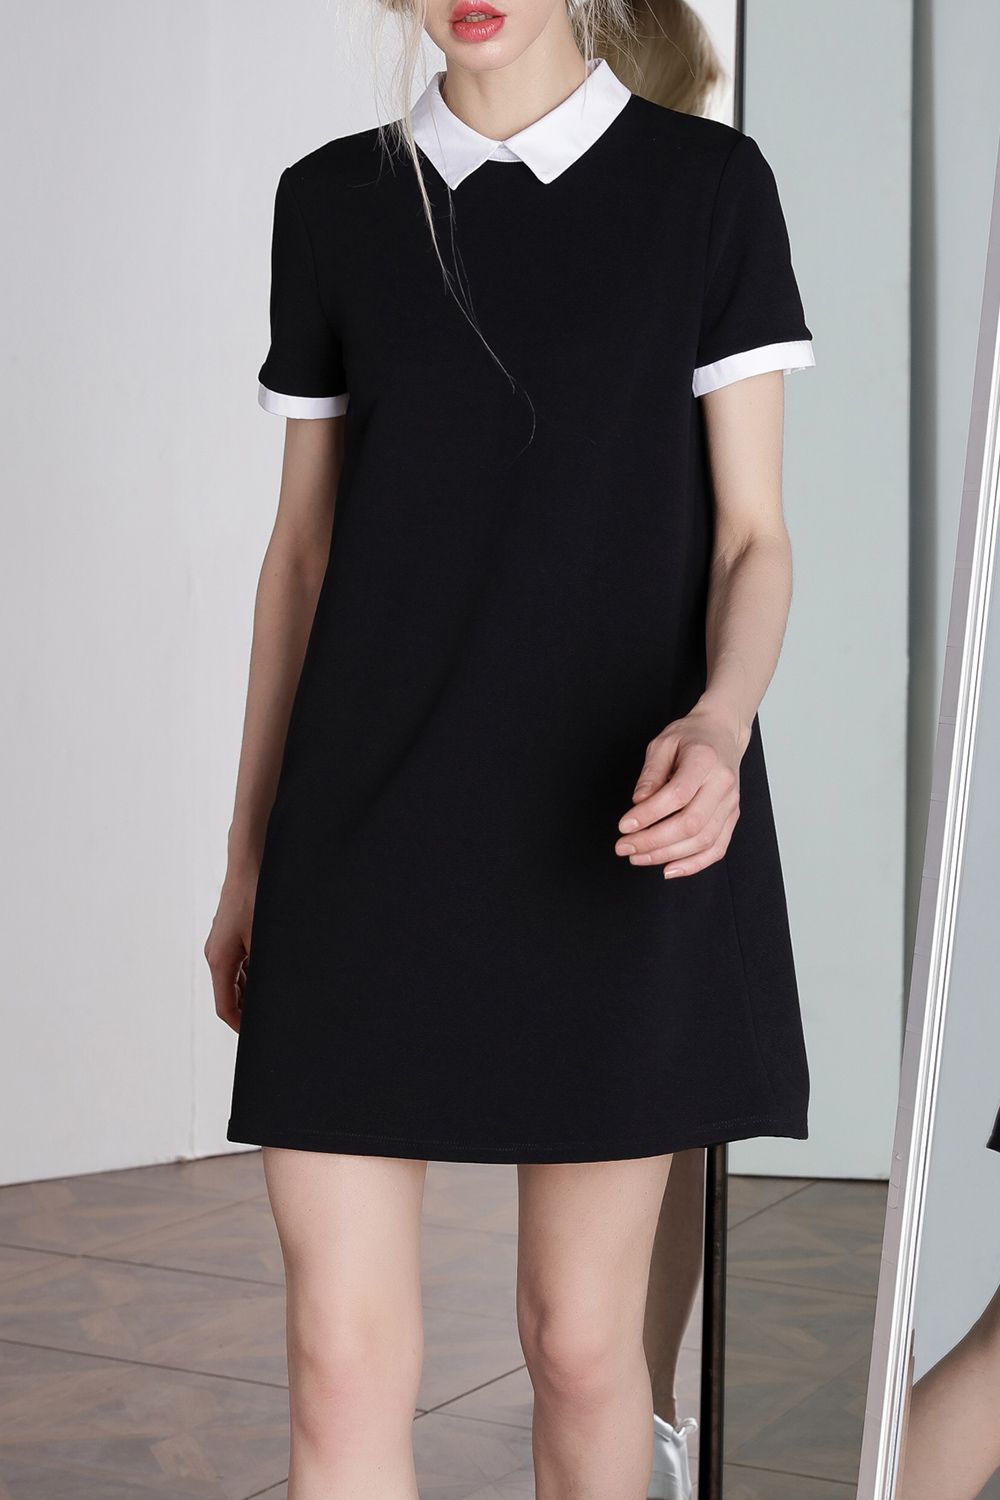 How To Wear Black Collared Dress